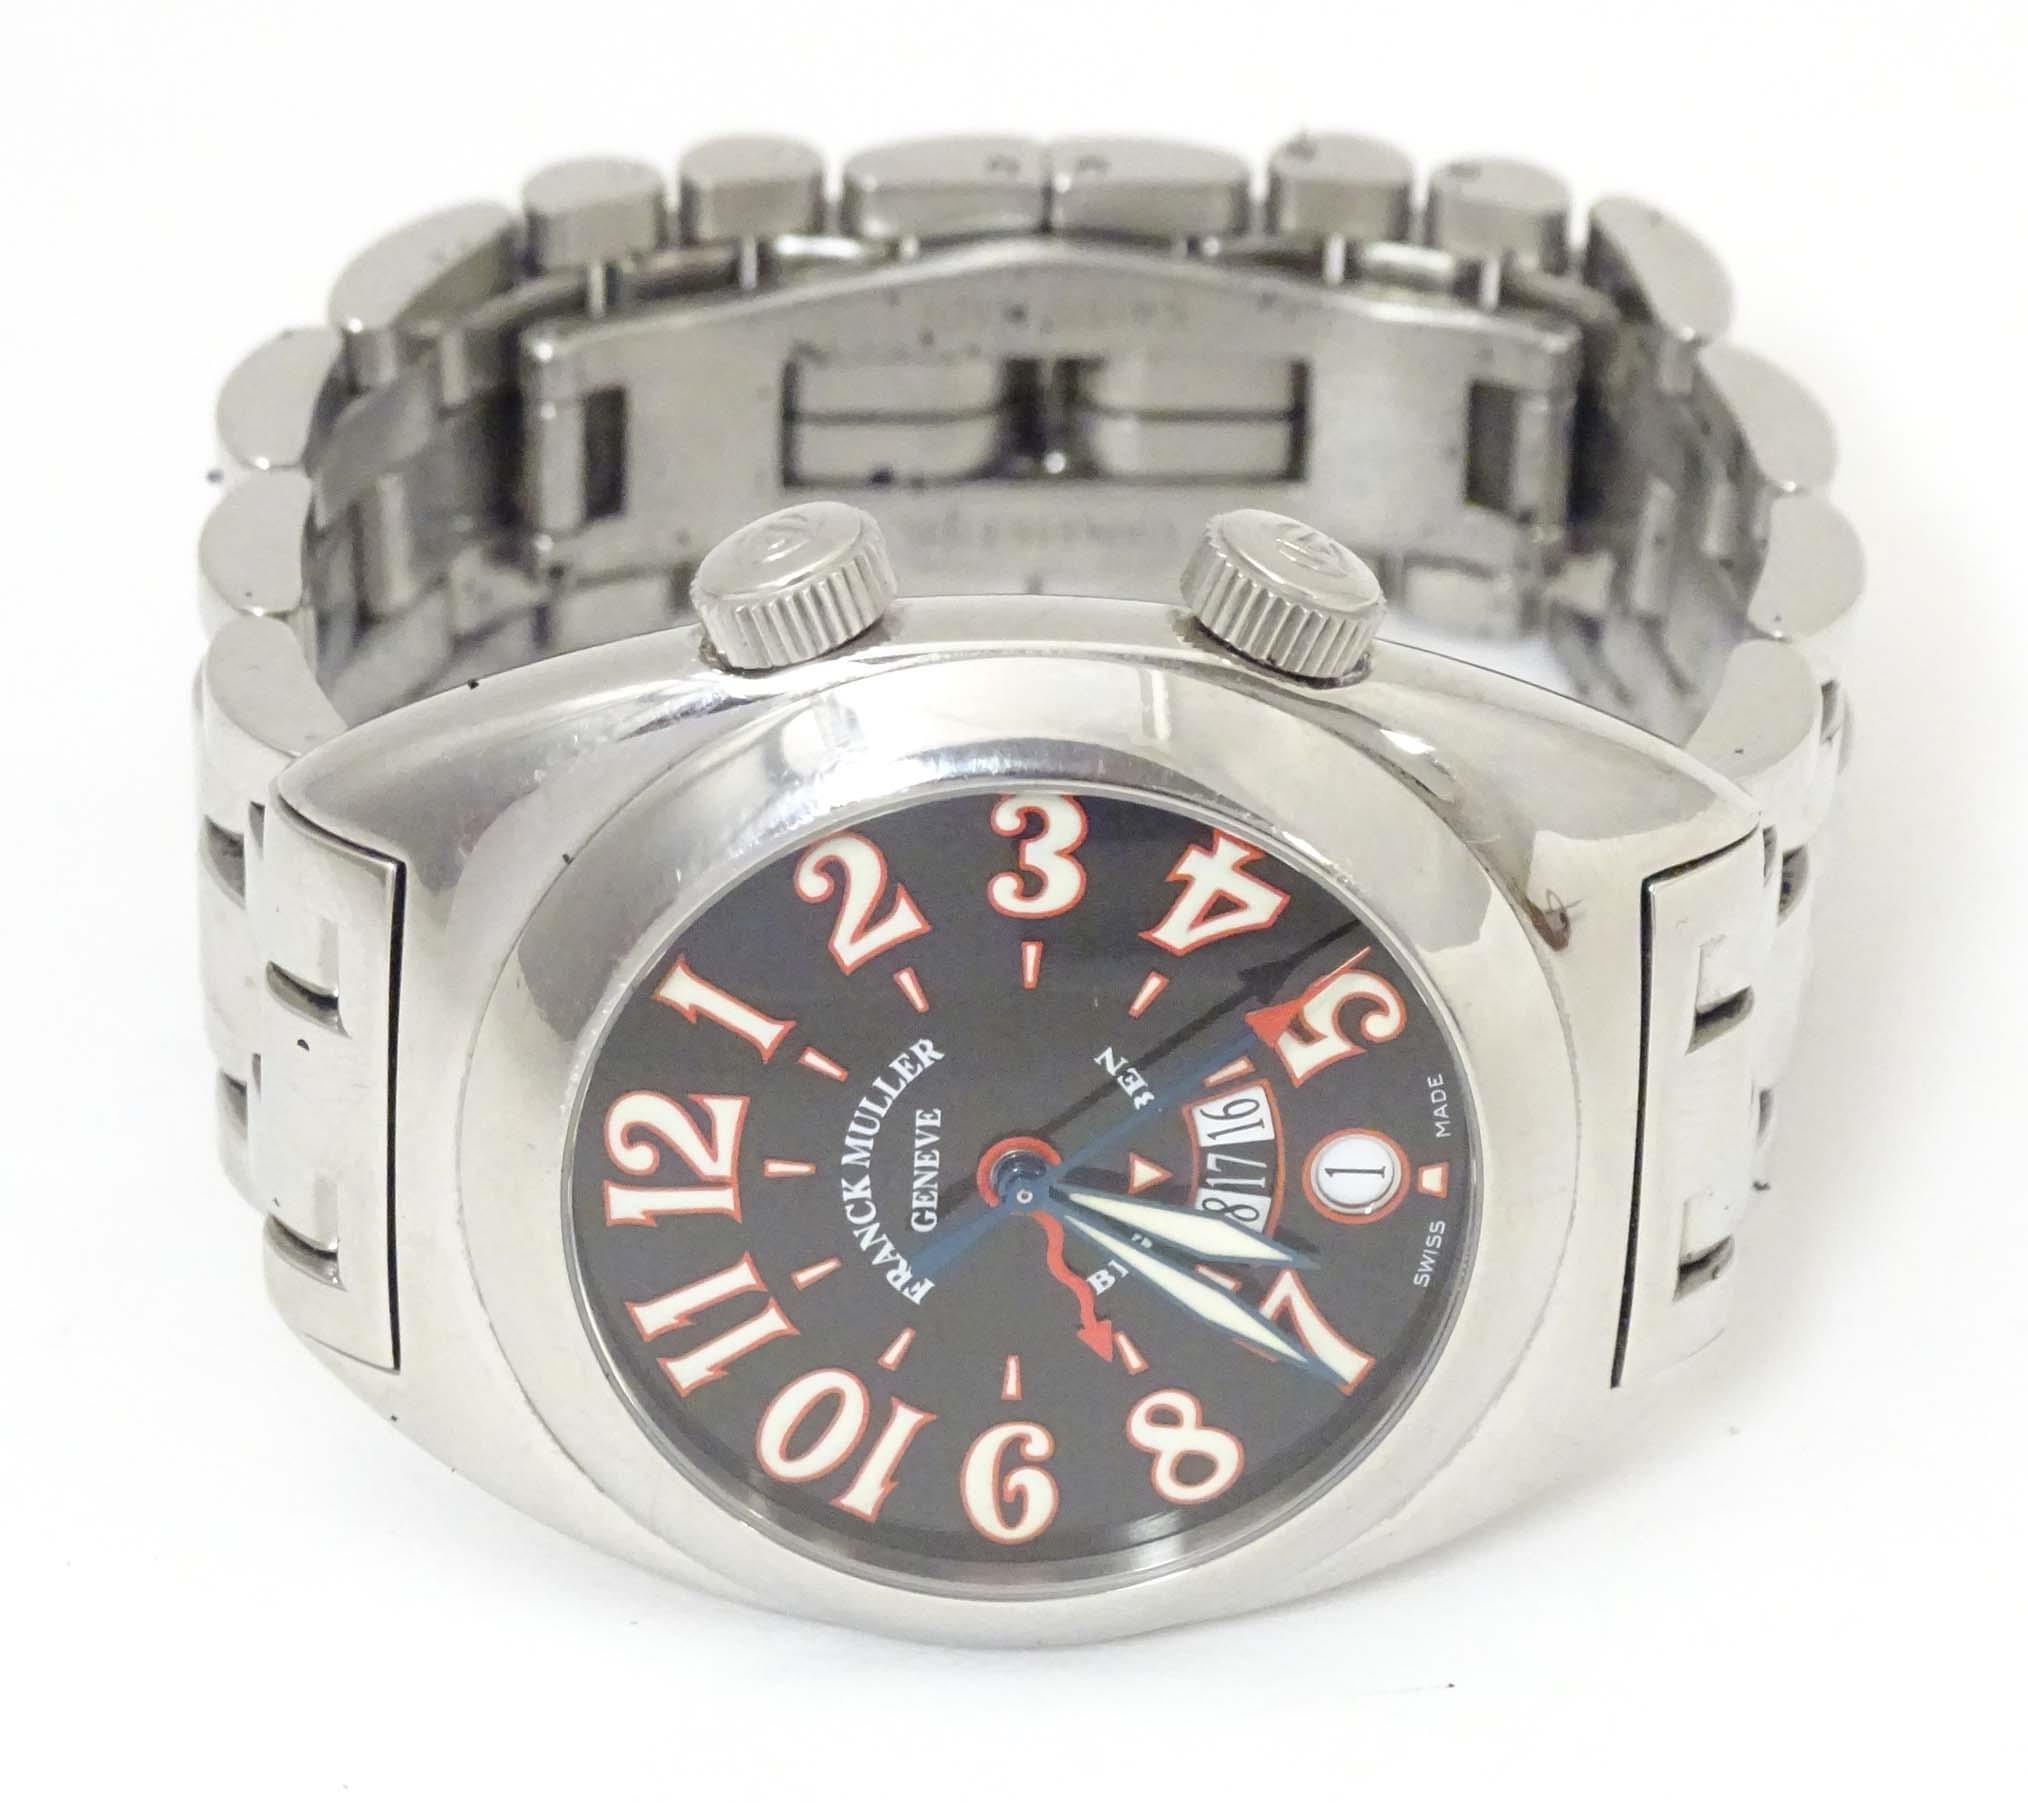 Franck Muller : A gentleman's 2000 Big Ben bracelet watch with a stainless steel case, numbered 269. - Image 6 of 12